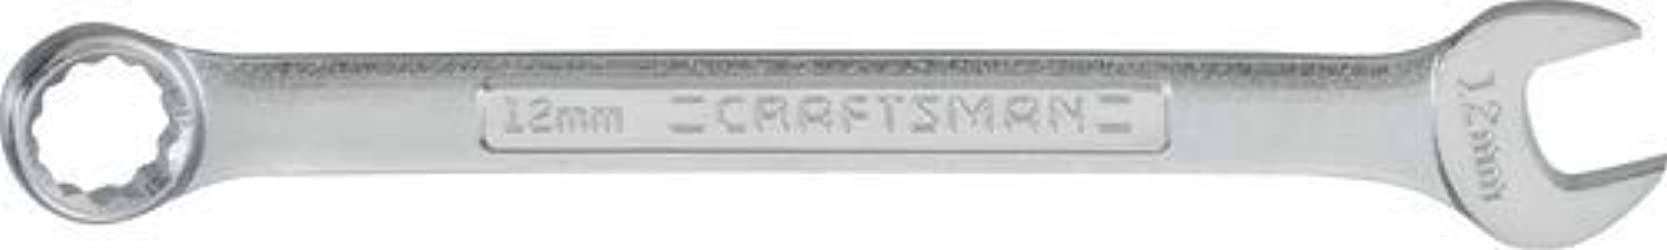 Craftsman 12mm 12-Point Metric Standard Combination Wrench | CMMT42916